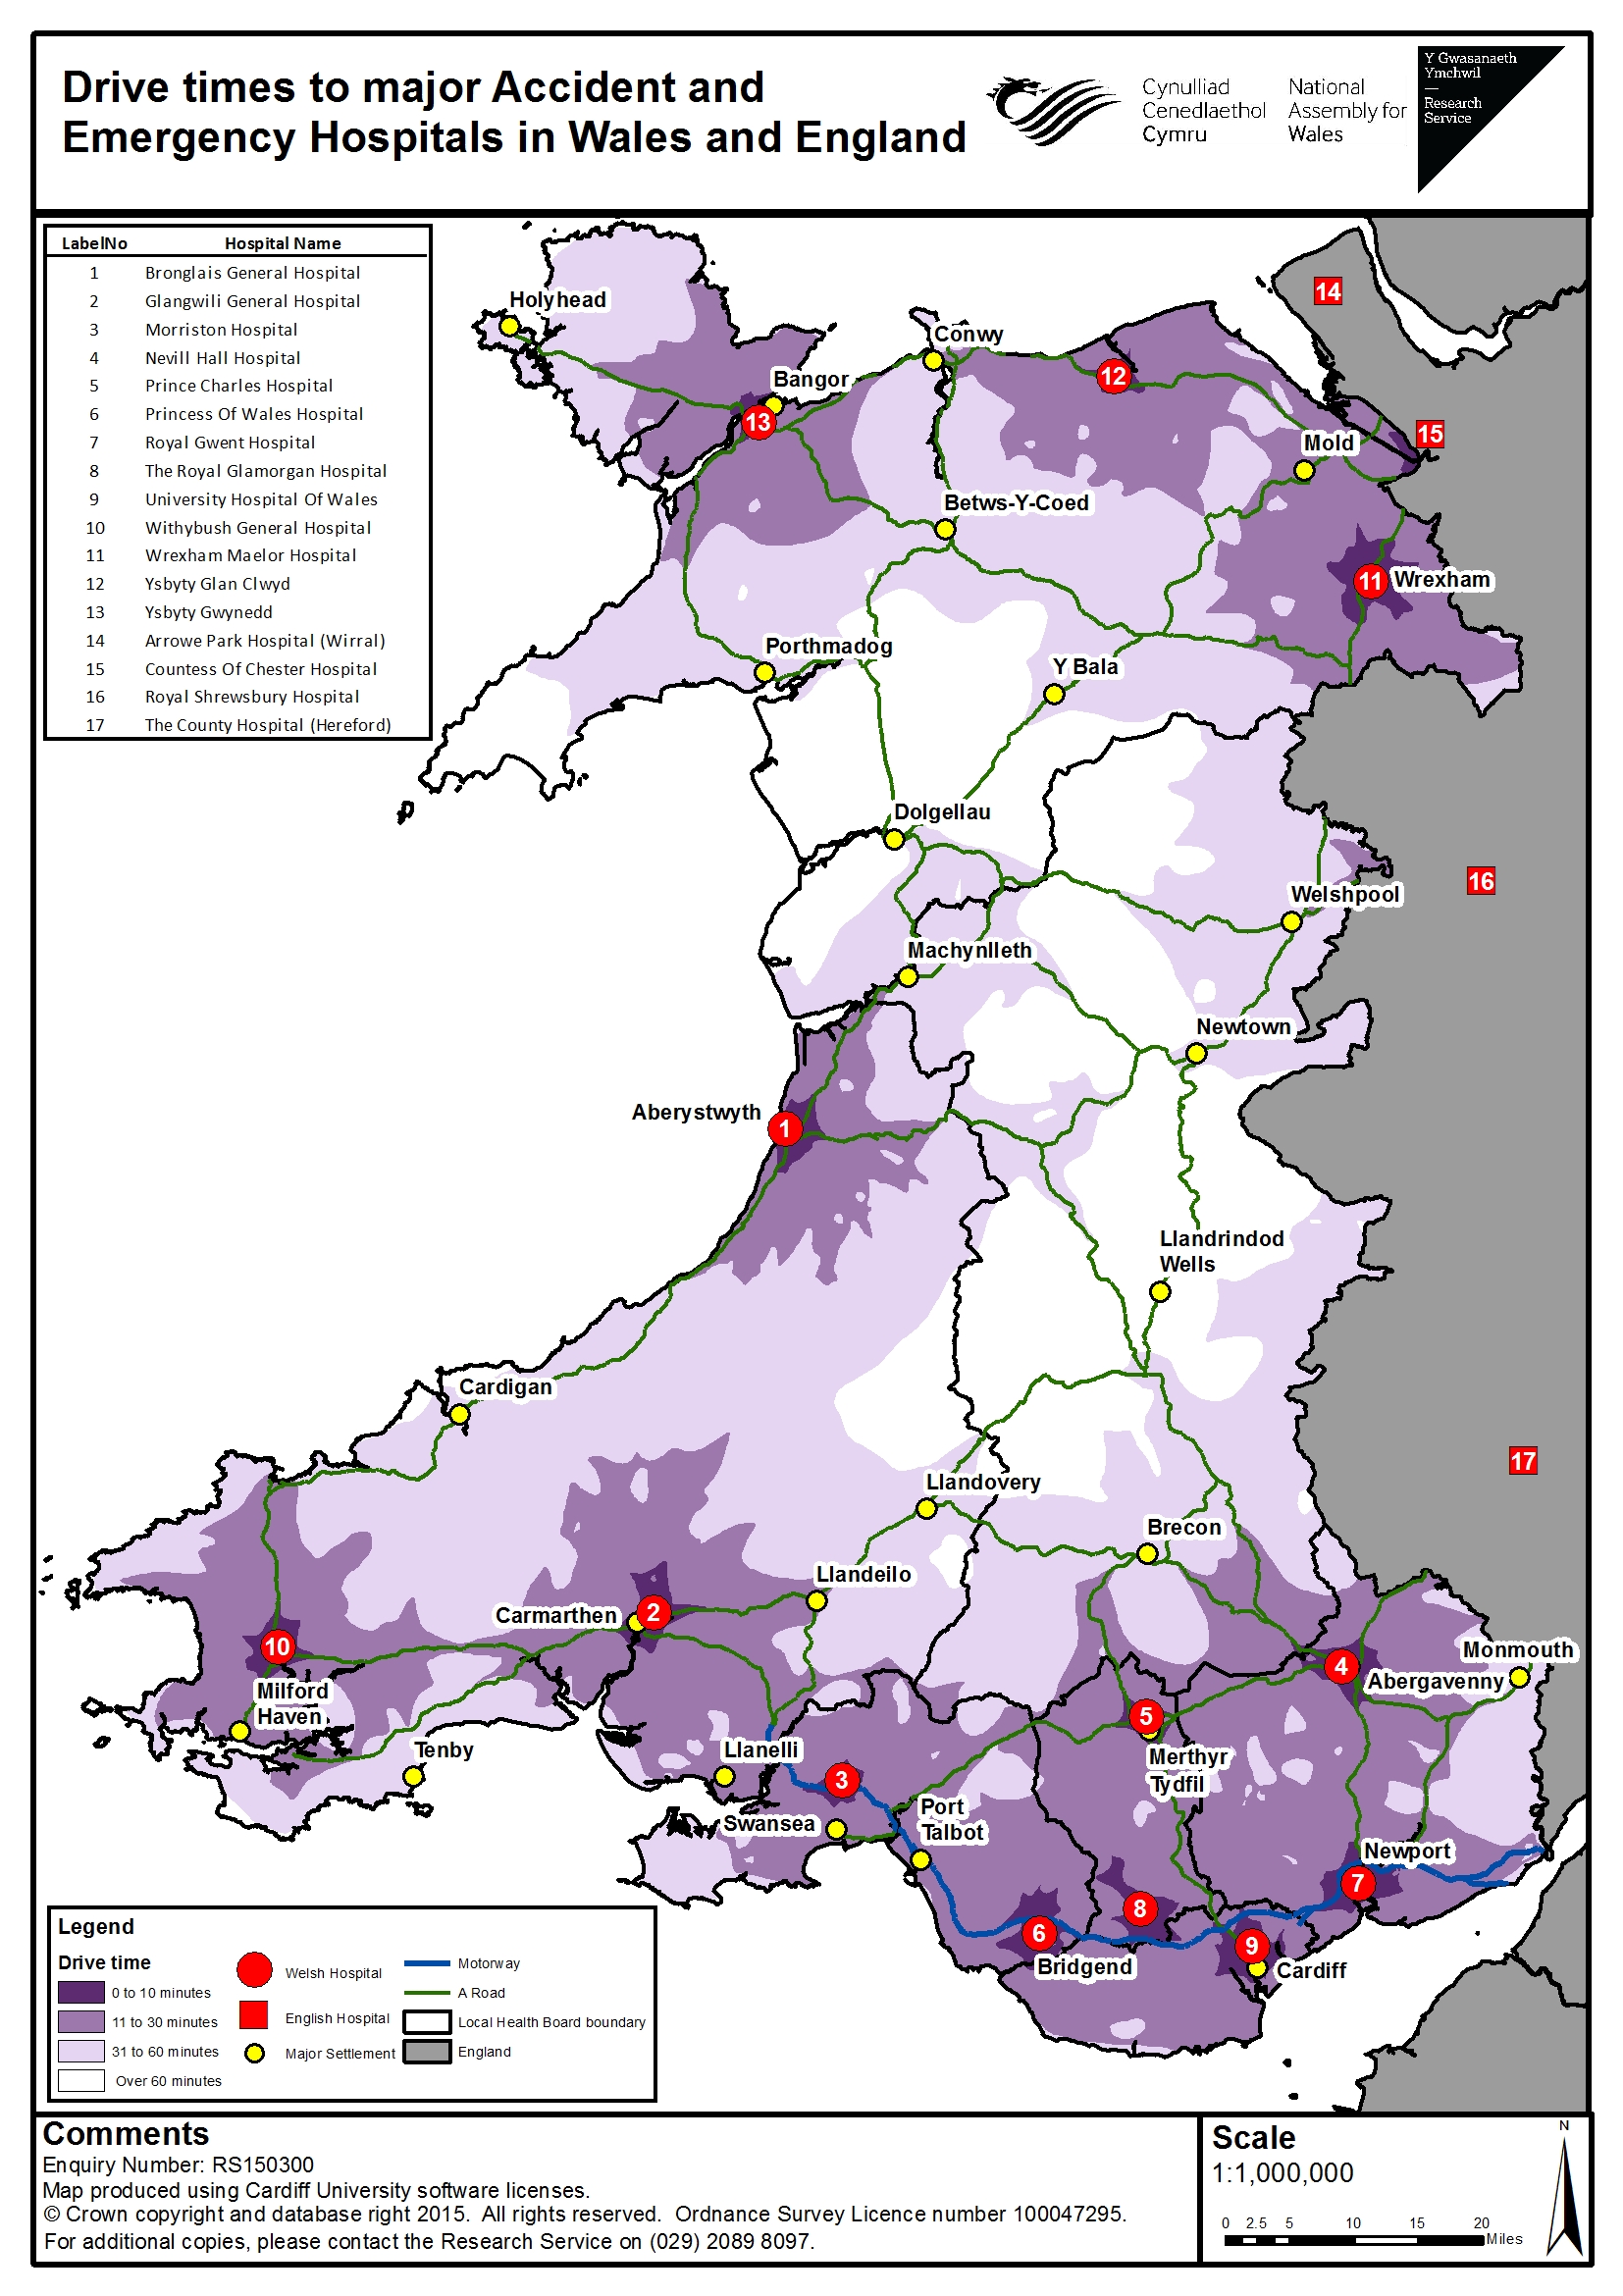 Map showing drive time to major A&E hospitals in Wales and England